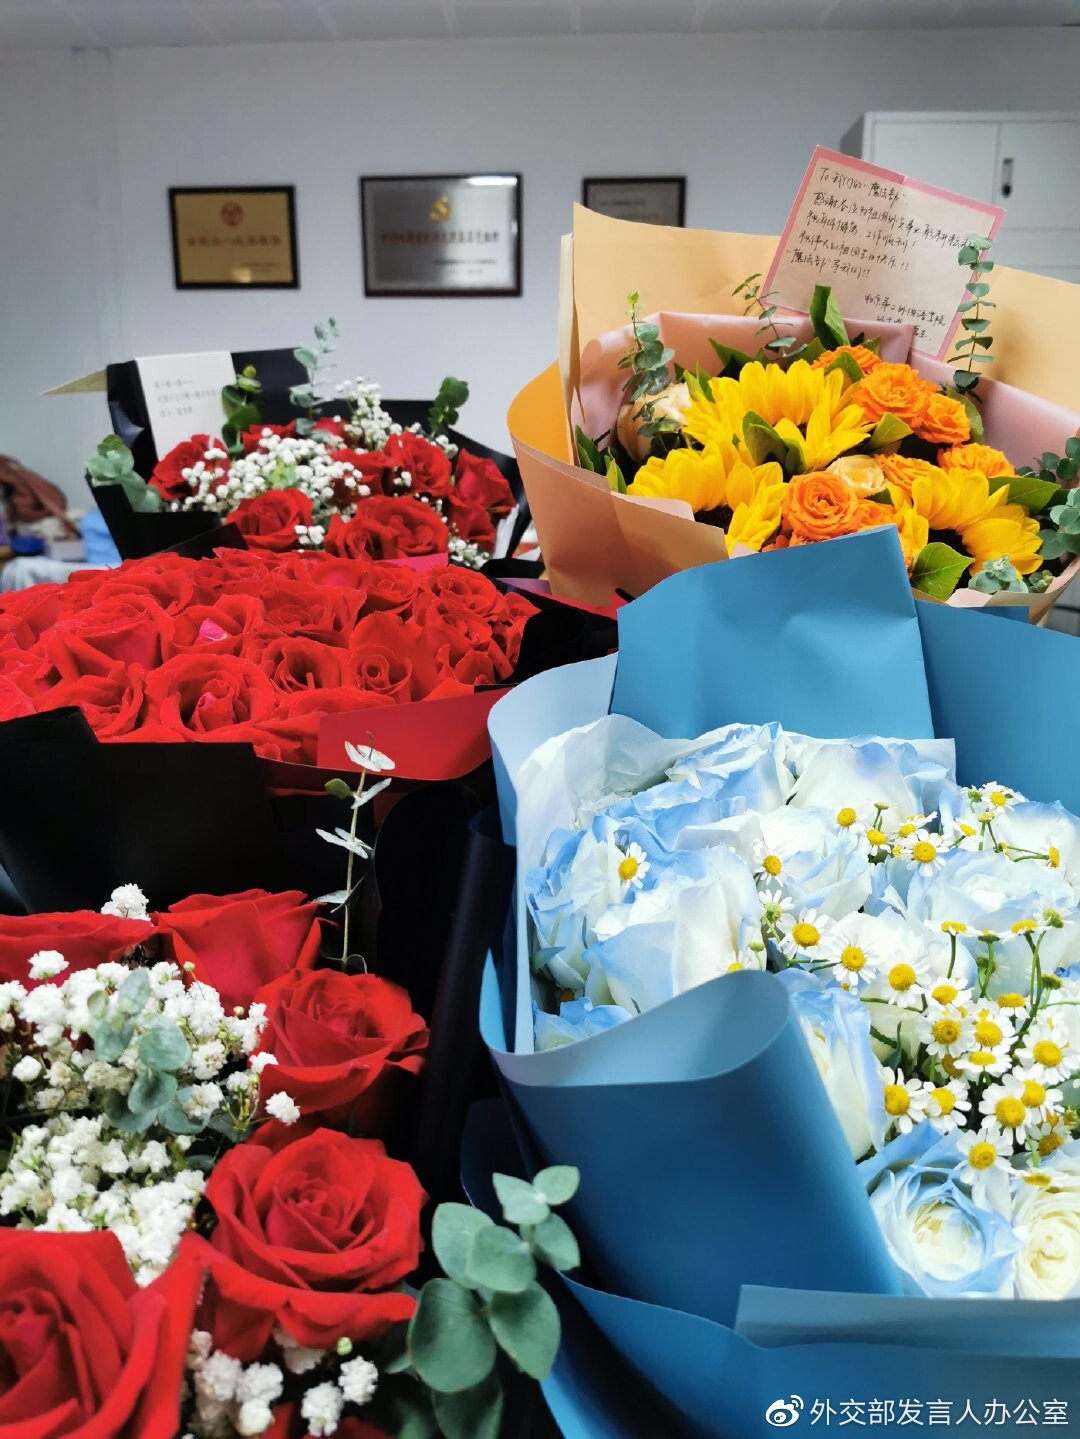 The foreign ministry has become a “sea of flowers” with the public sending bouquets following Meng Wanzhou’s release. Photo: Weibo